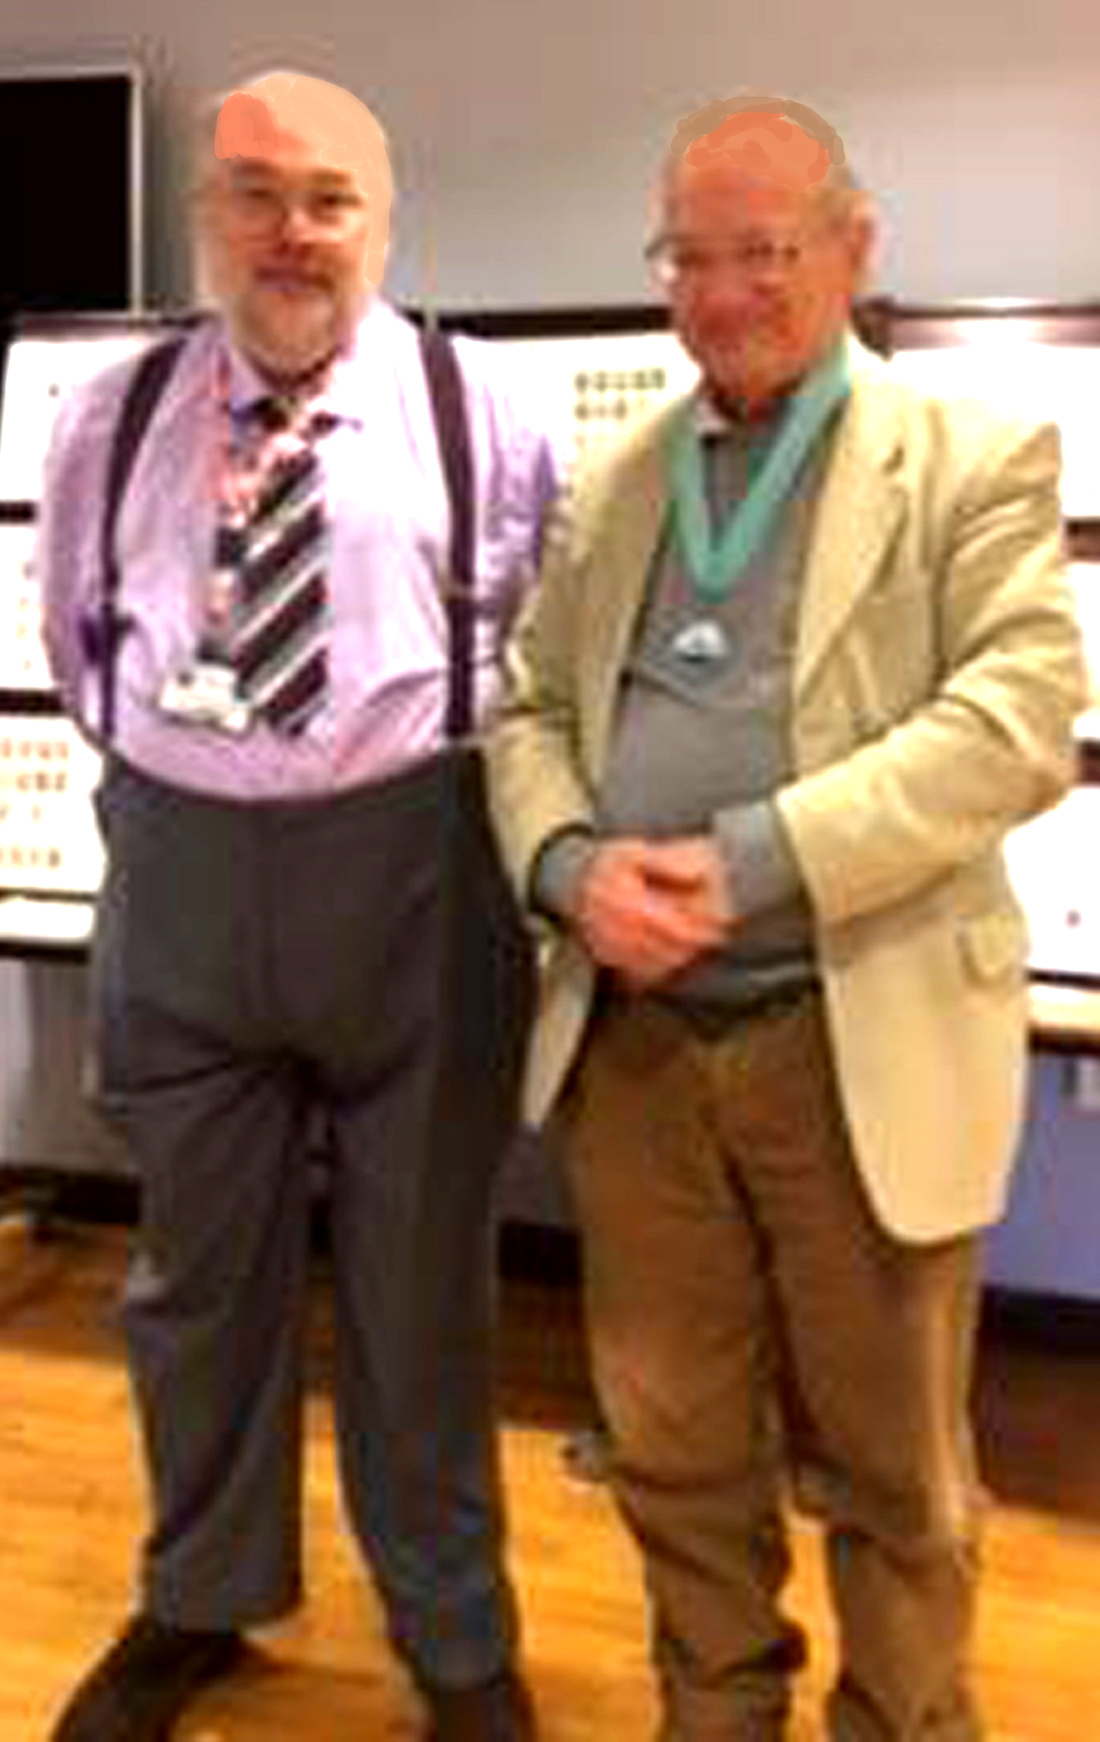 ASCGB - 2017 Convention at Leeds showing Nigel Harpham (Left), our Secretary at the time, and our President, Michael Goodman